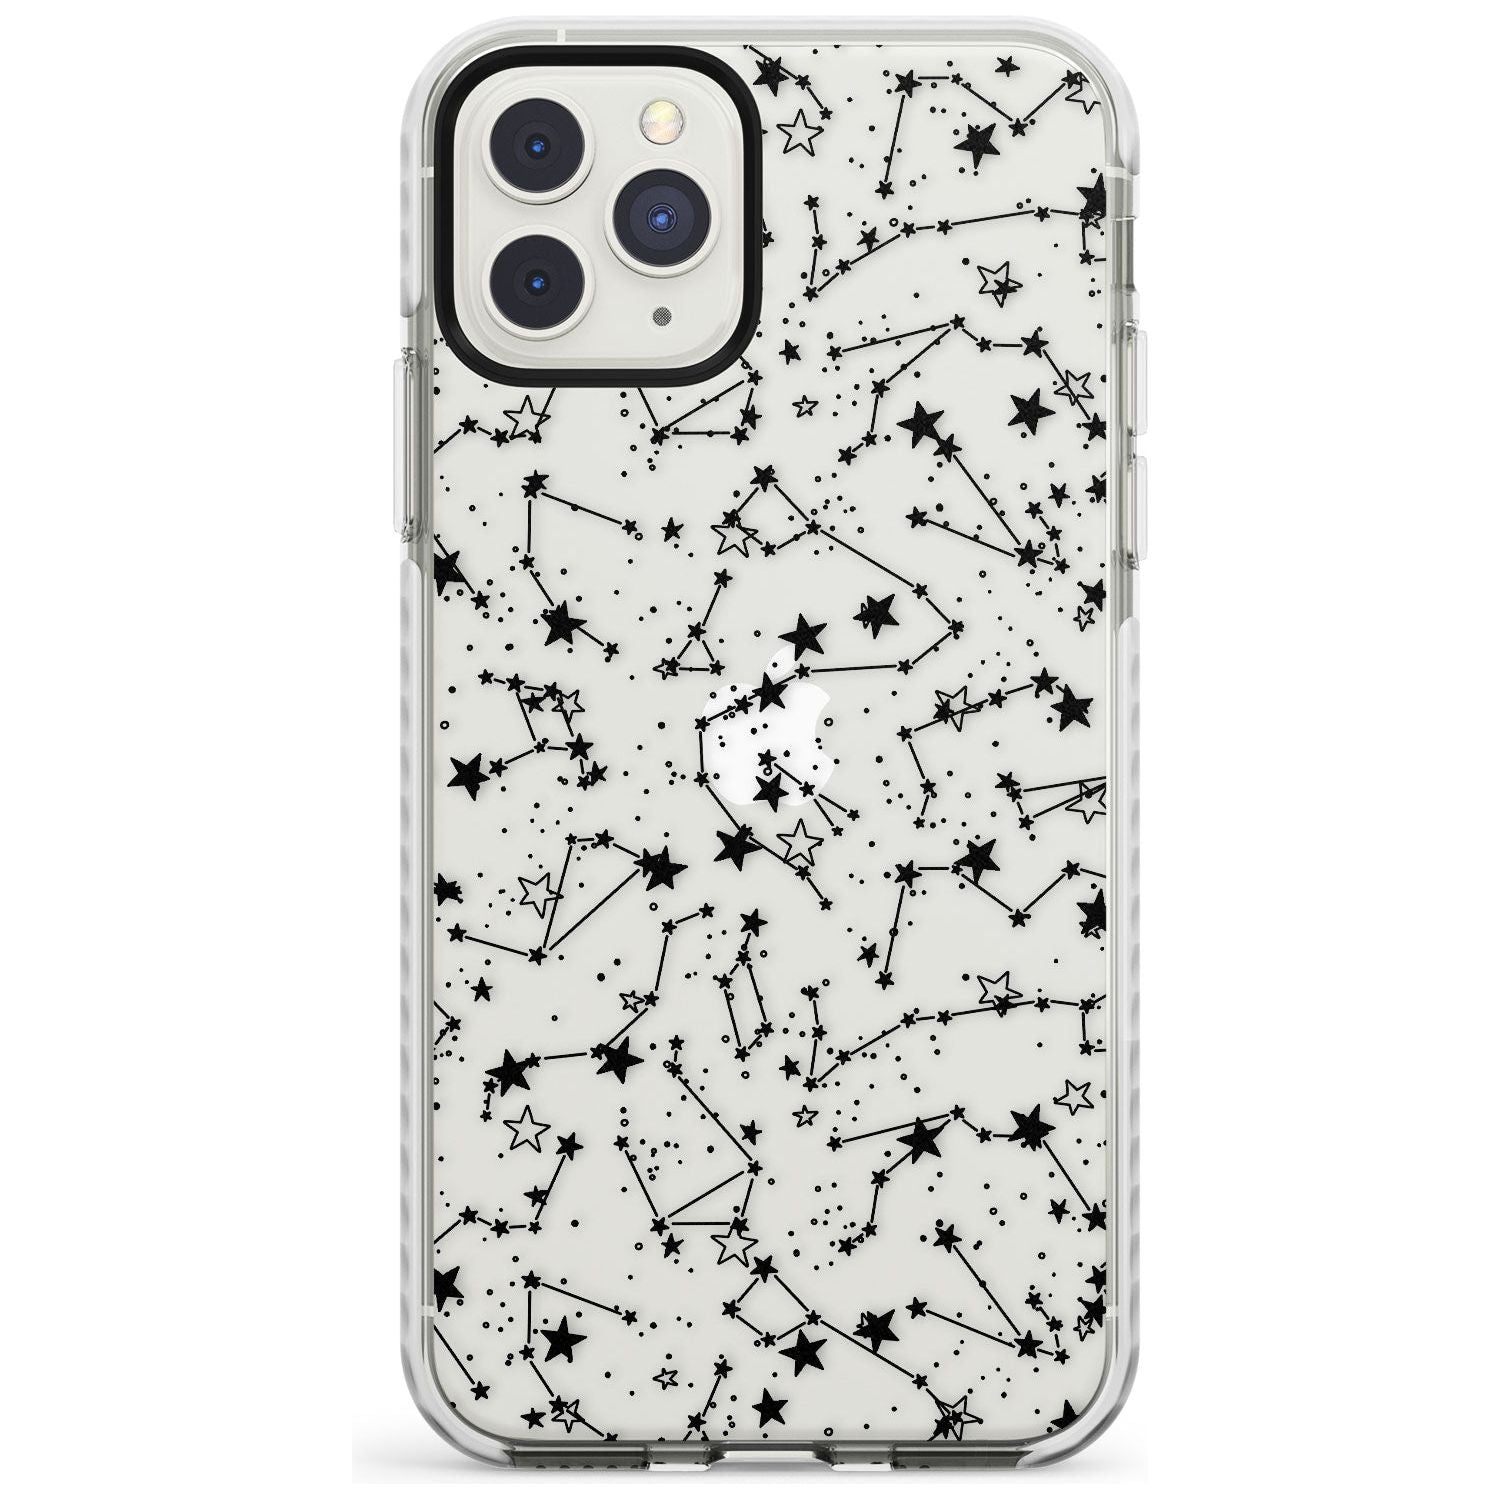 Constellations Impact Phone Case for iPhone 11 Pro Max